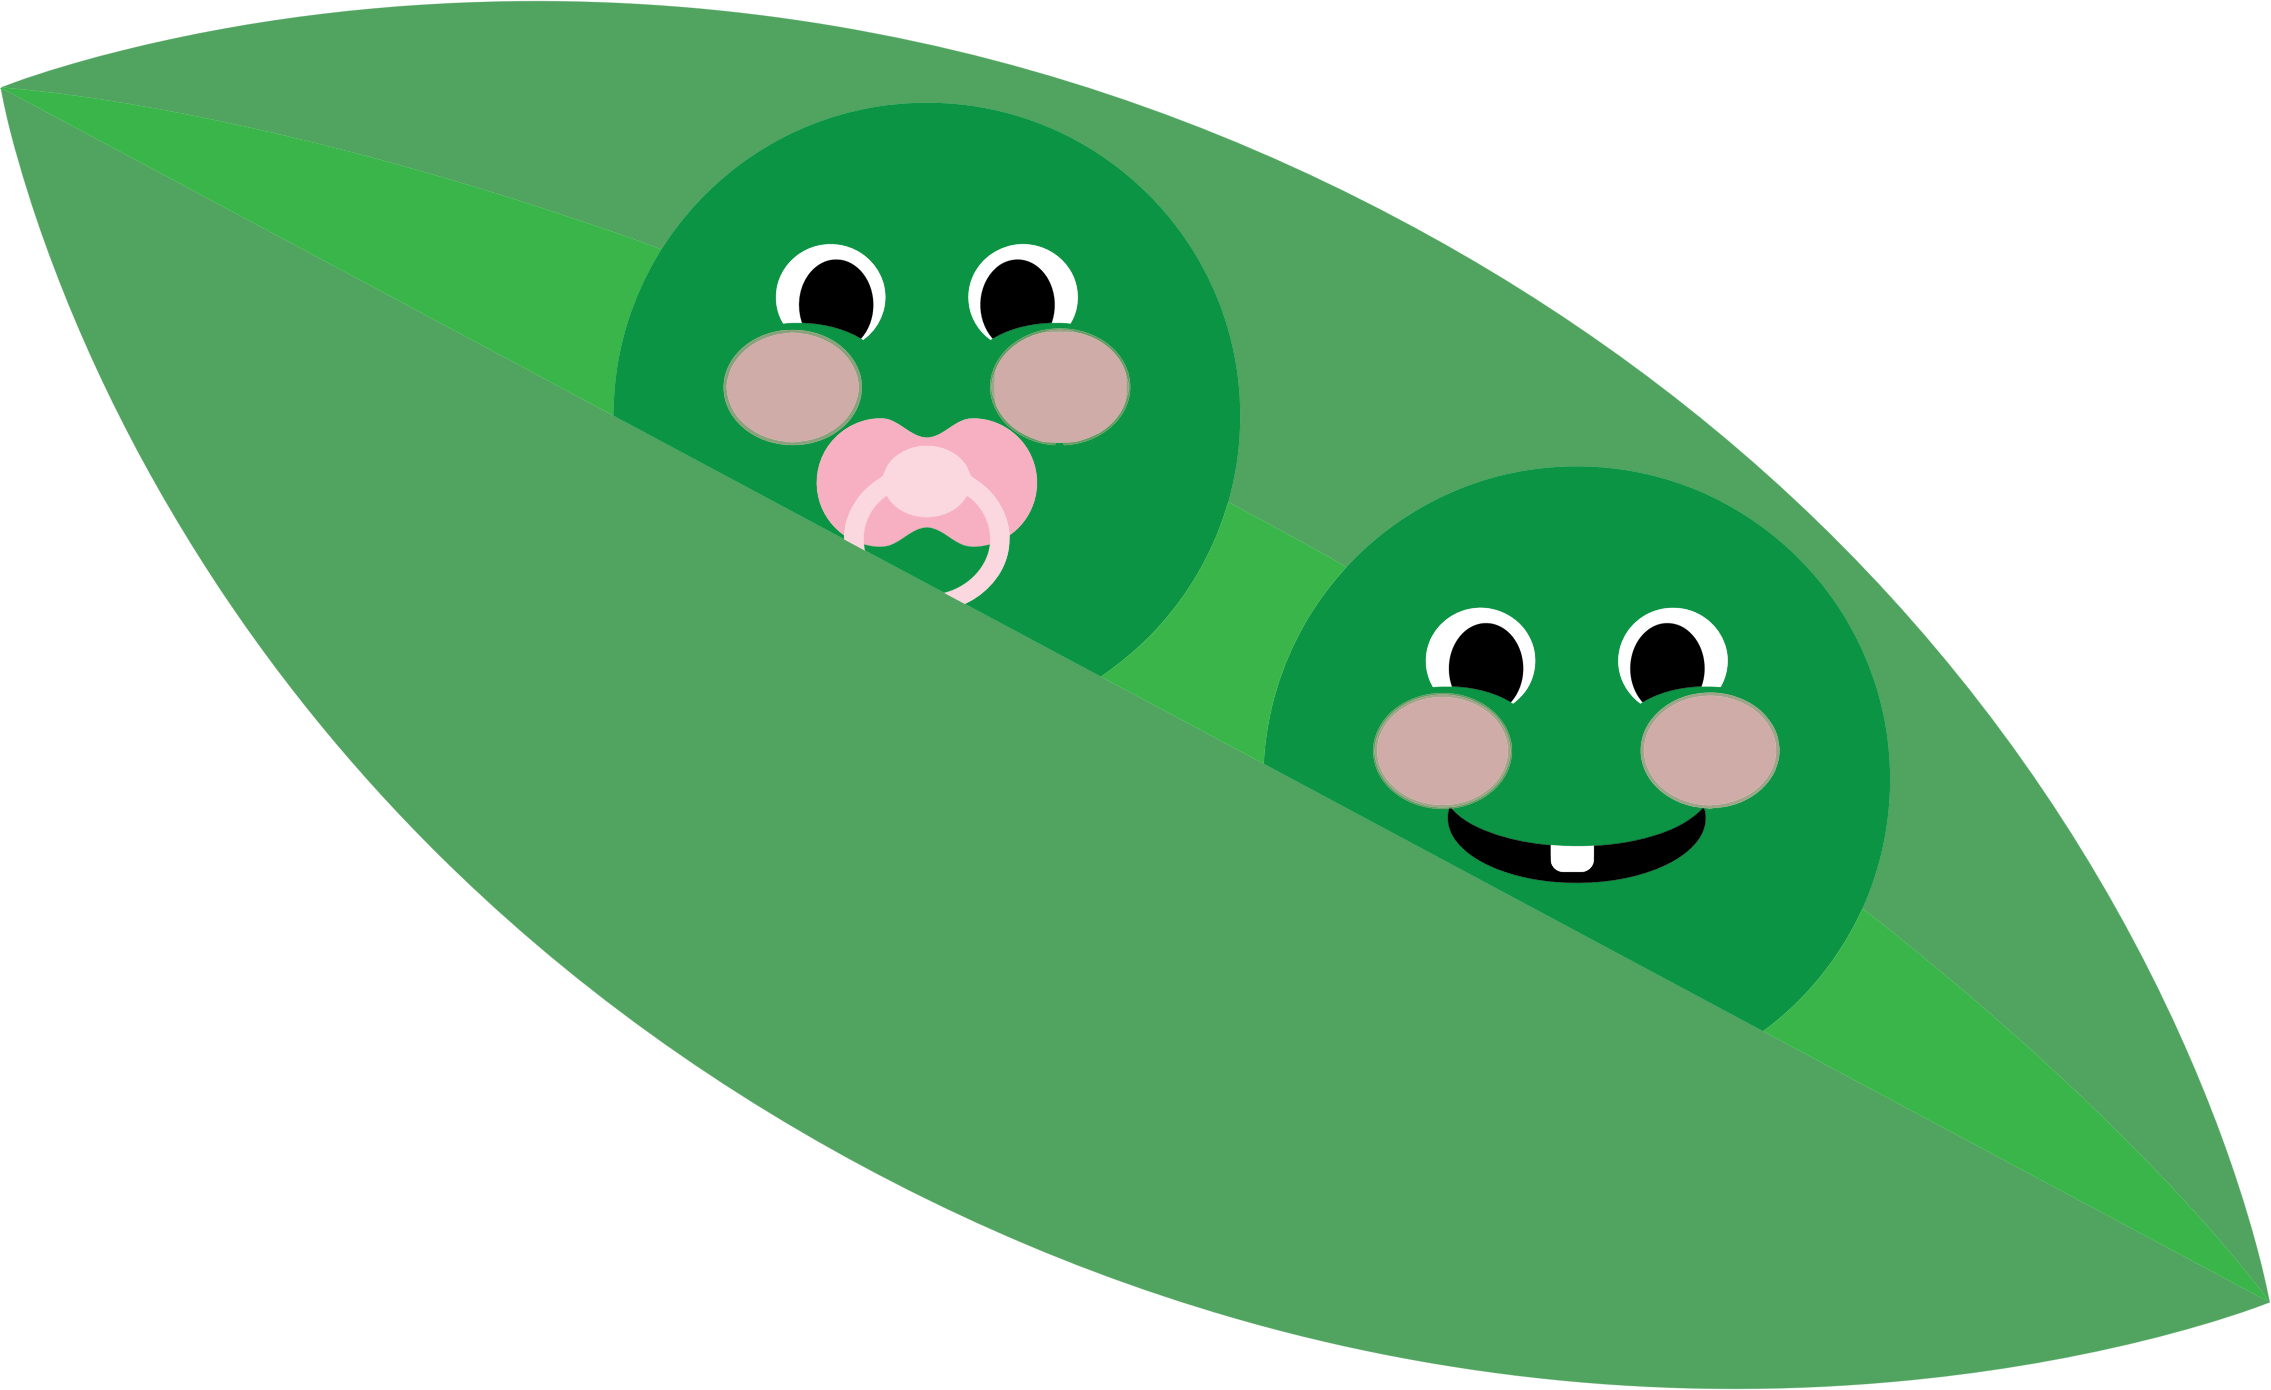 Two-Peas-In-A-Pod-4.png (2271×1390)